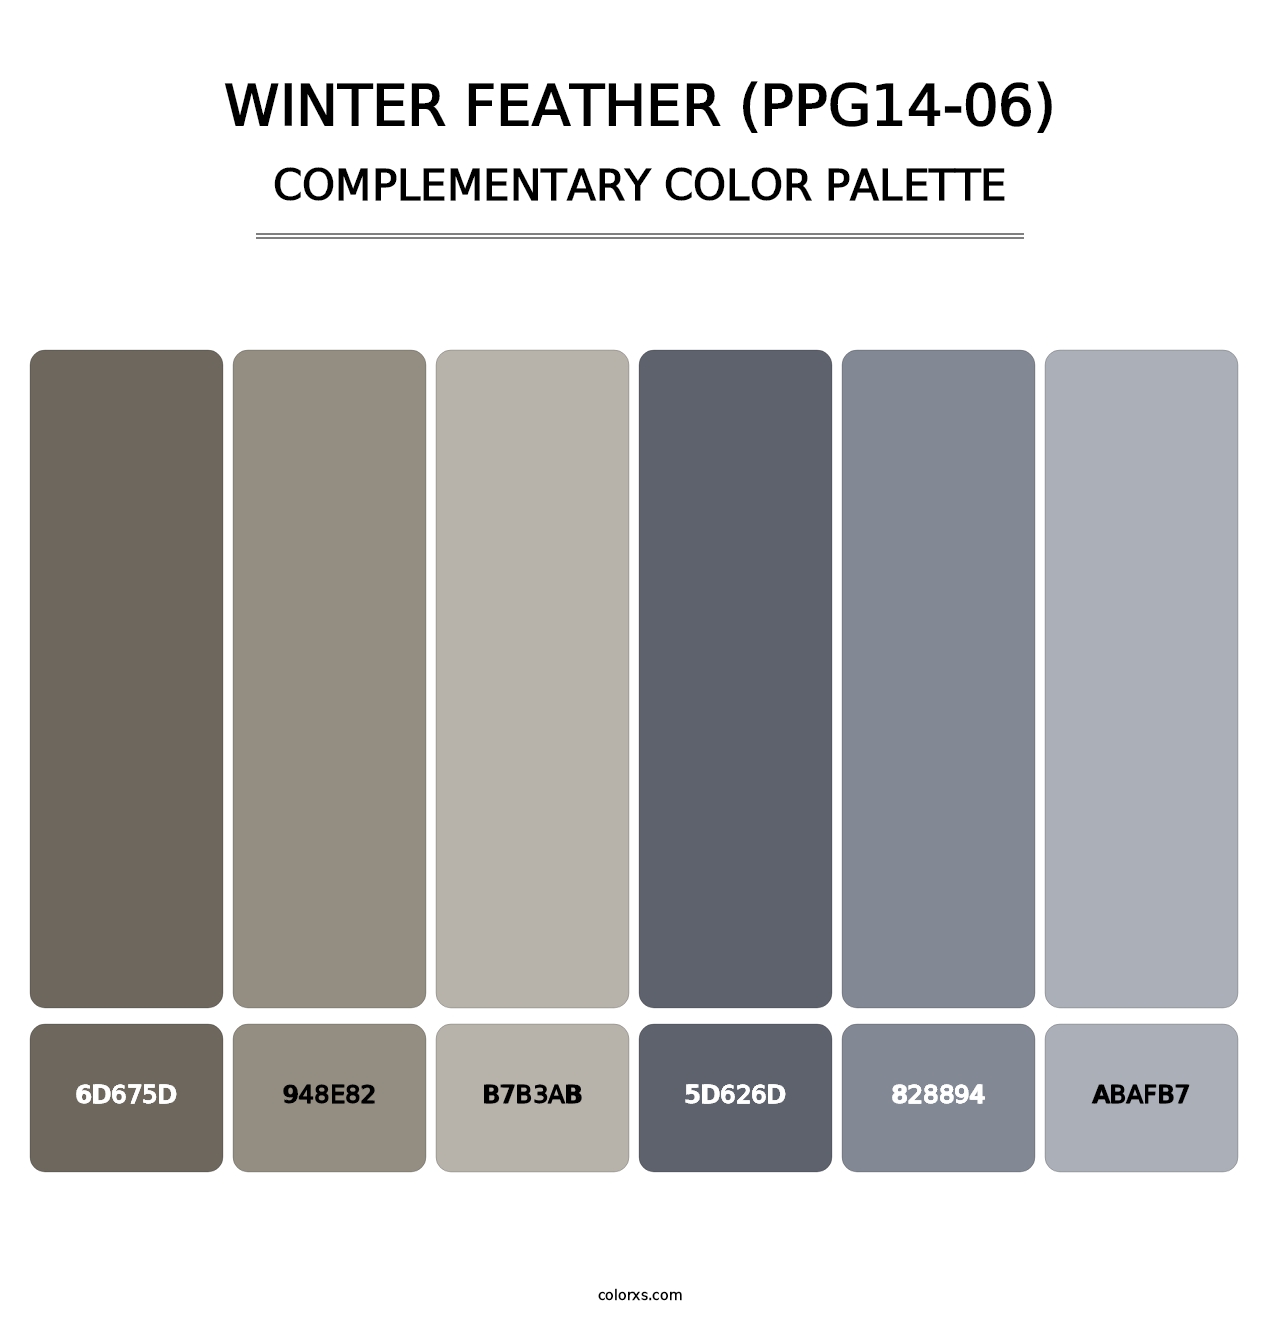 Winter Feather (PPG14-06) - Complementary Color Palette